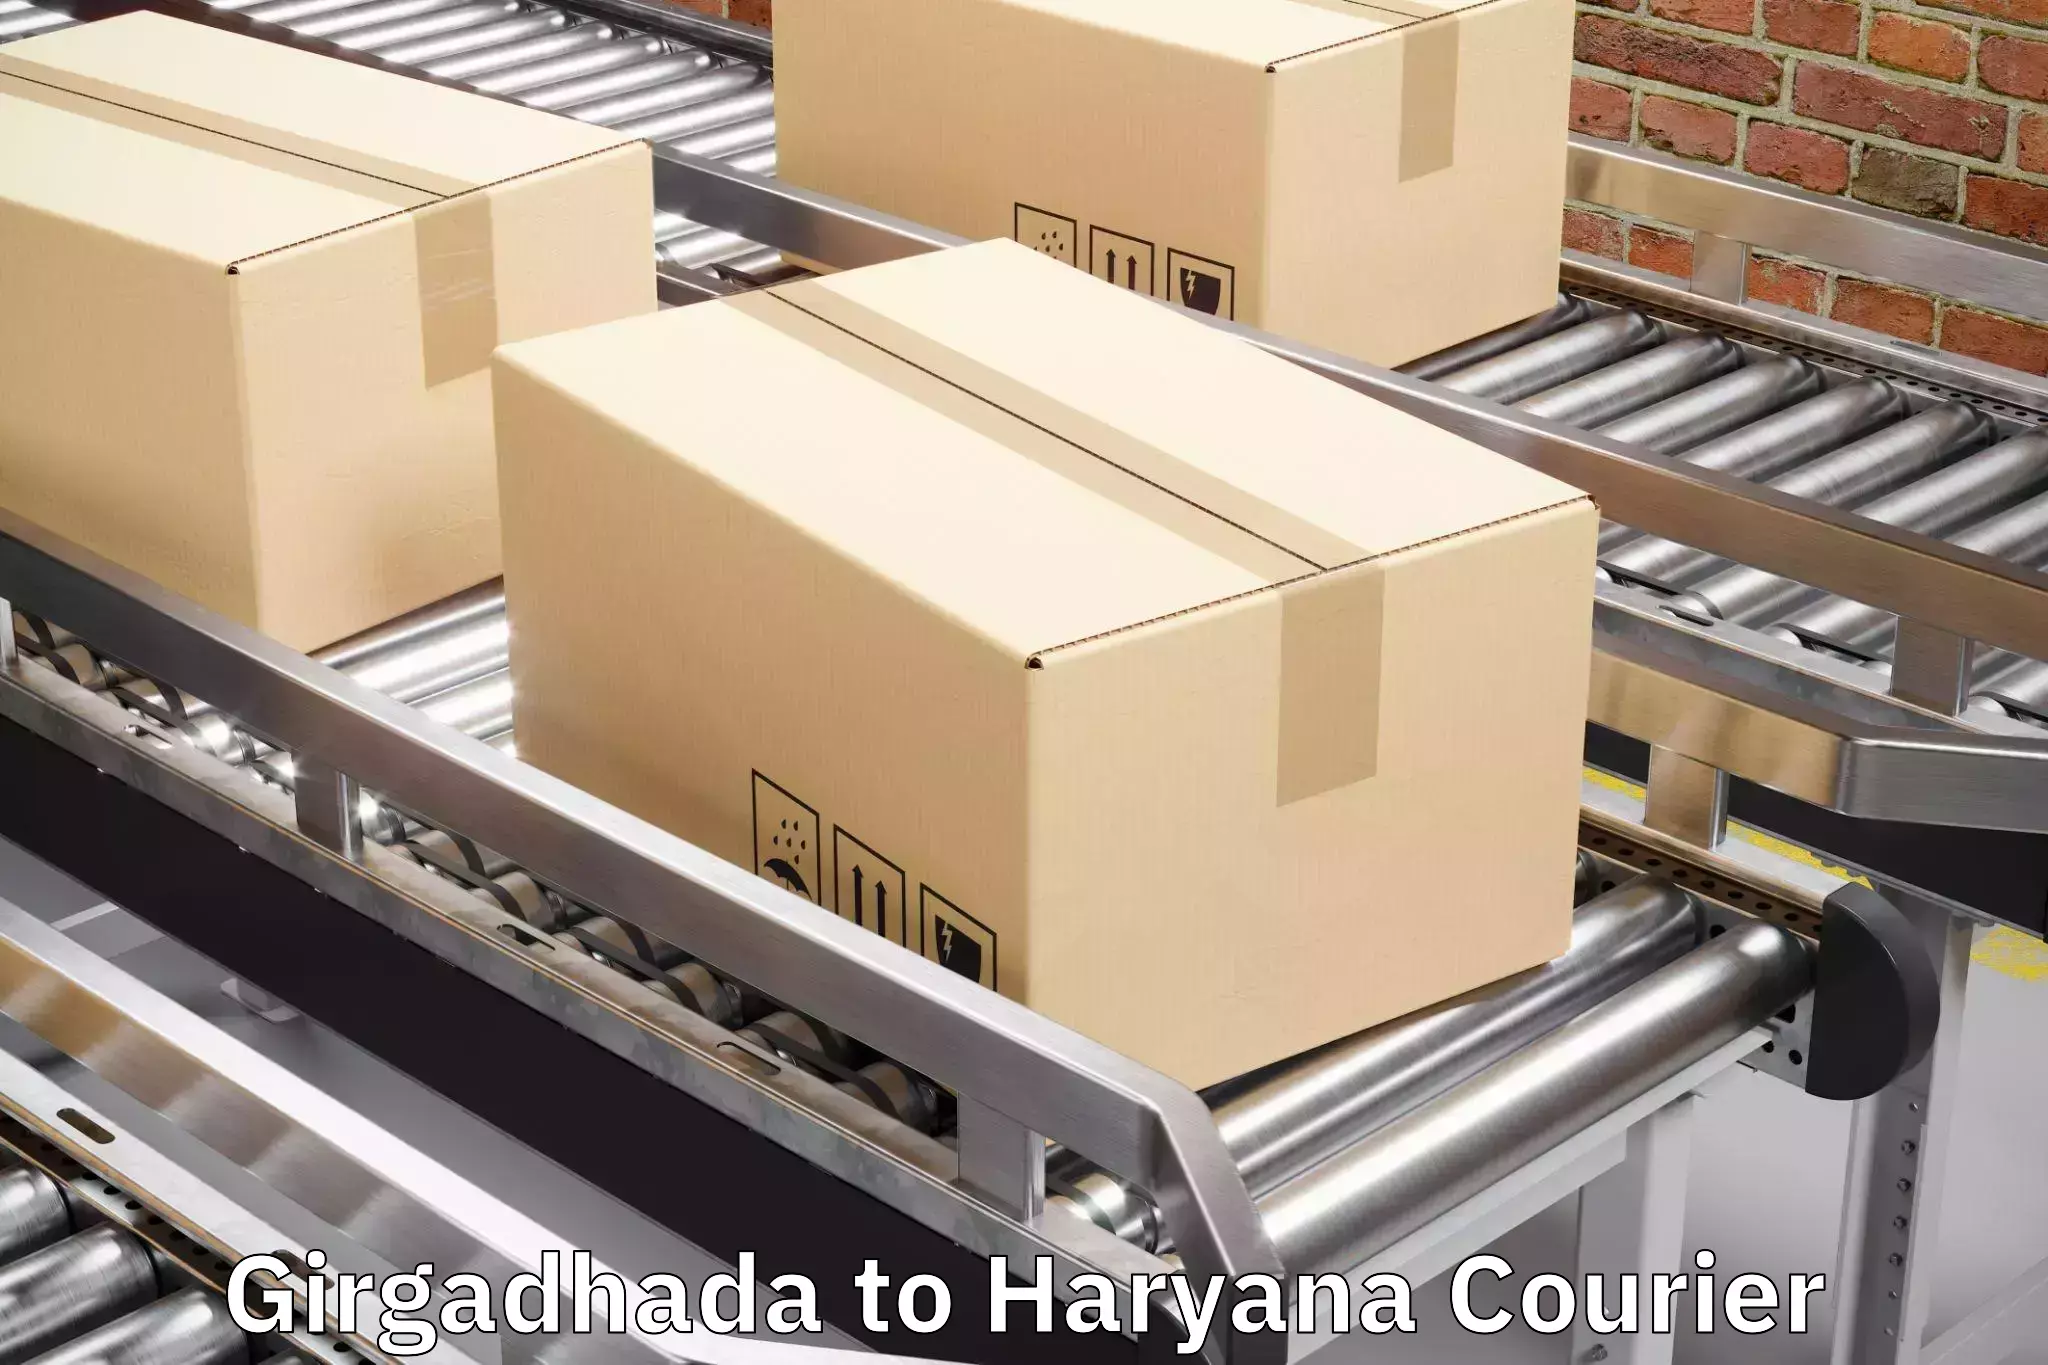 Personal luggage delivery in Girgadhada to NCR Haryana